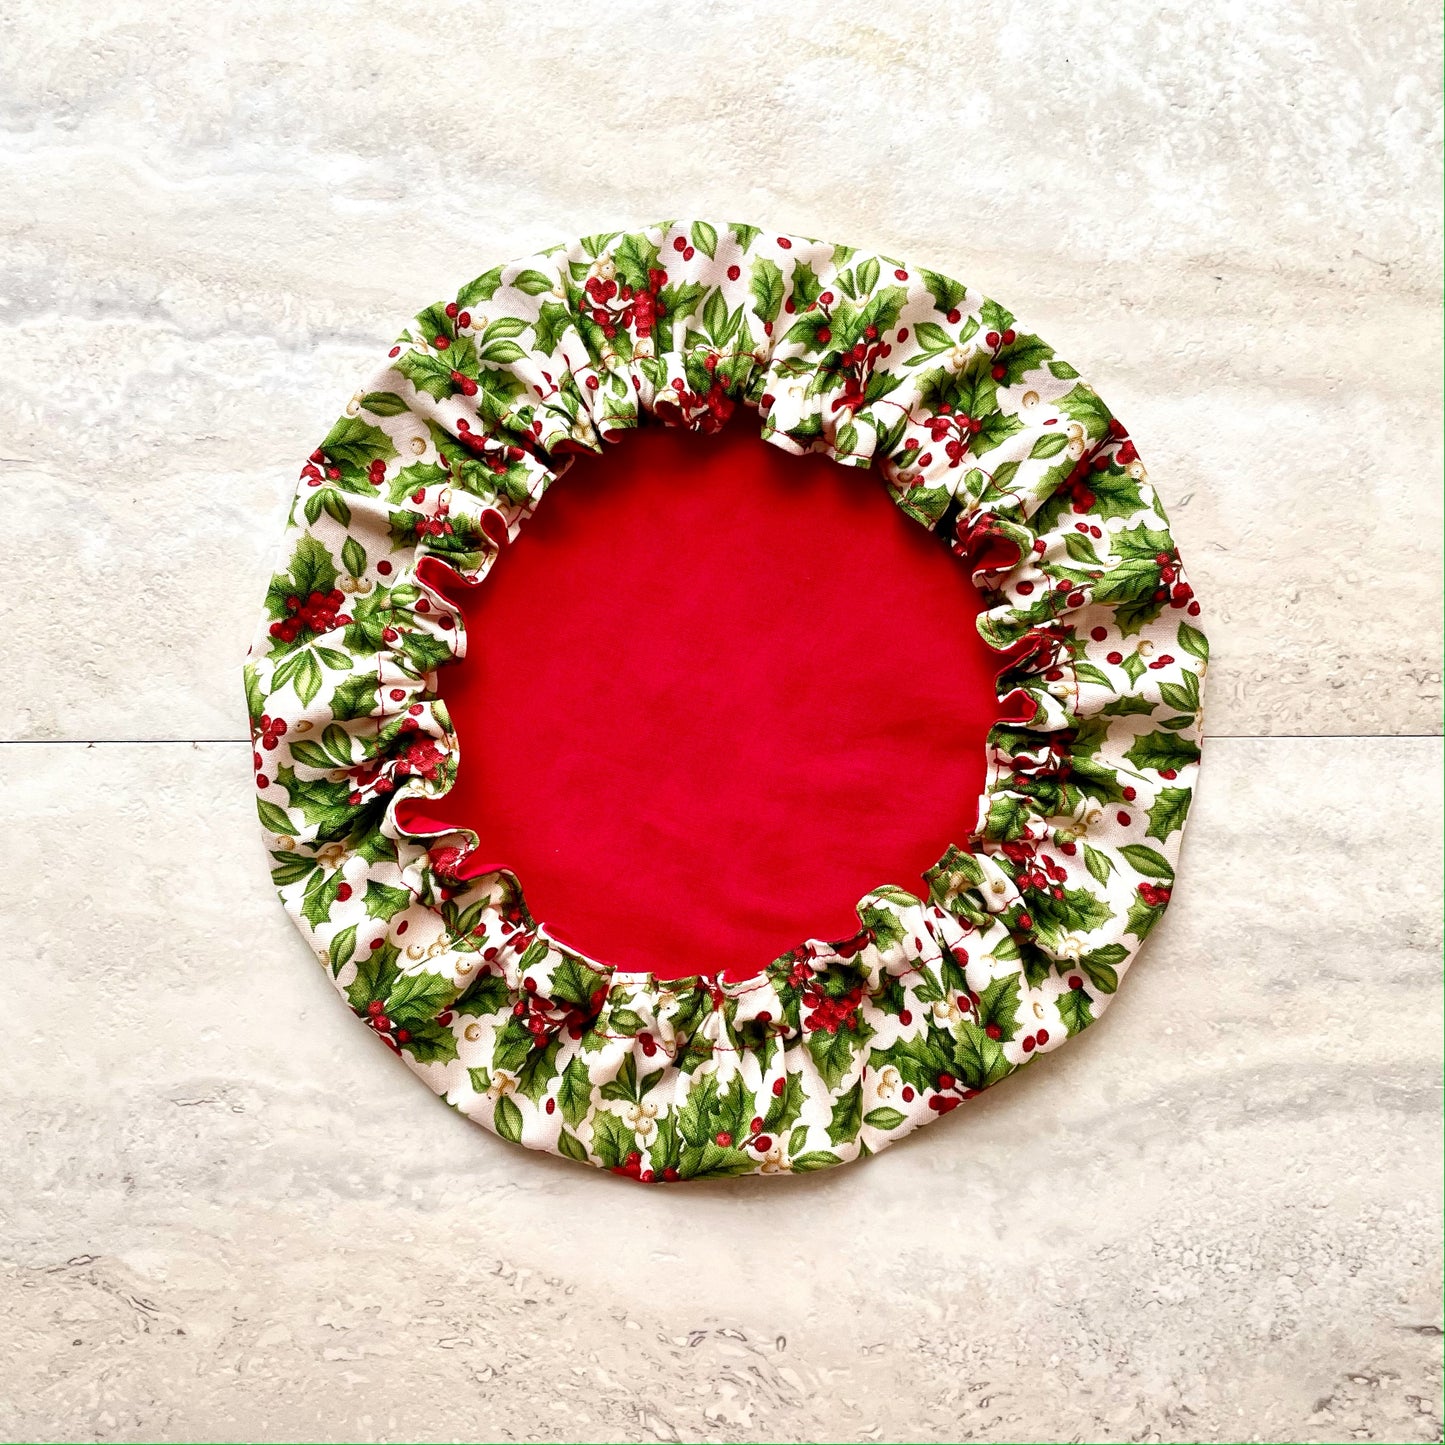 Stand Mixer Bowl Covers - Holly and Berries